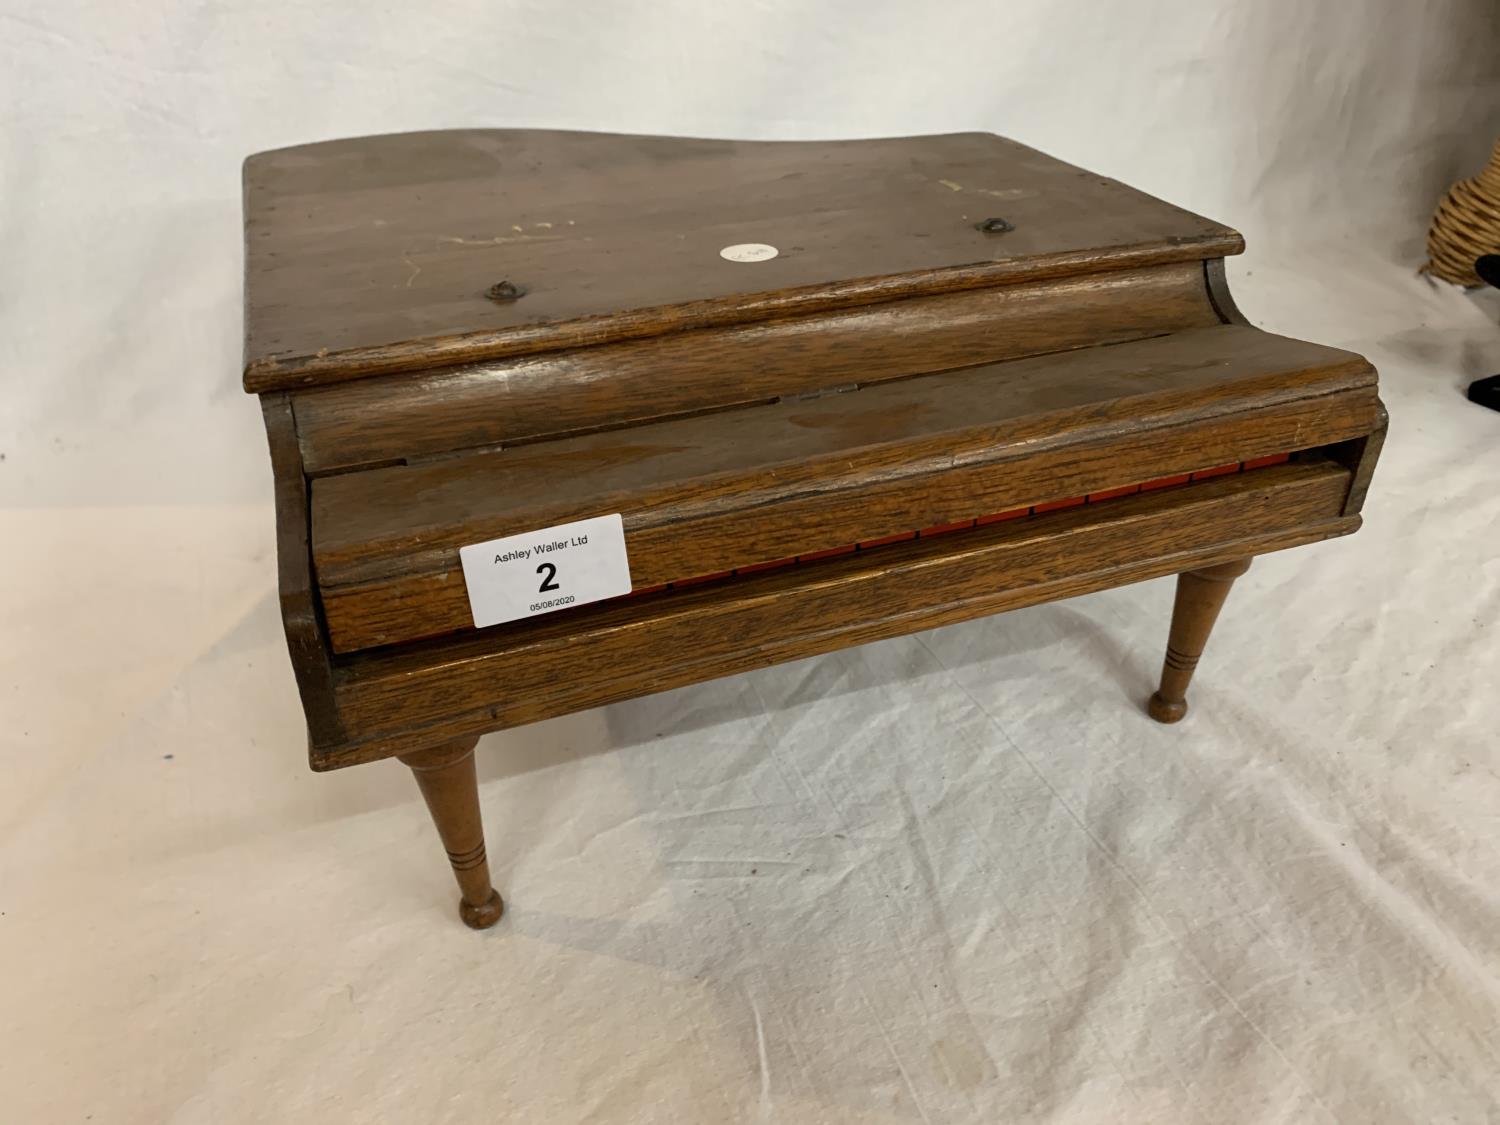 A VINTAGE SMALL PIANO - Image 8 of 8